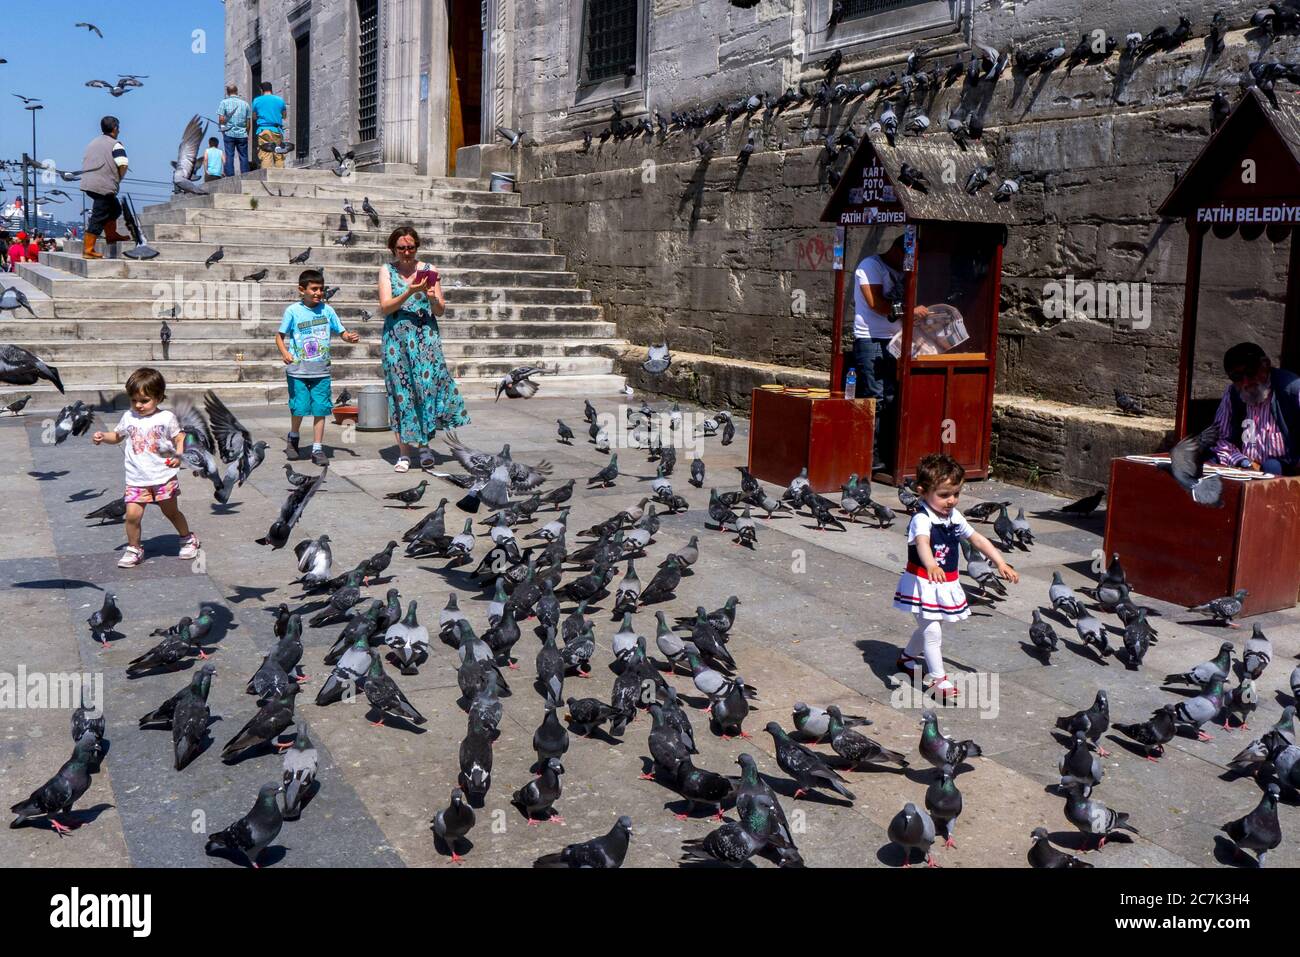 Children try to catch pigeons gathered next to the Yeni Camii in the Eminonu district of Istanbul in Turkey. This mosque is over 400 years old. Stock Photo